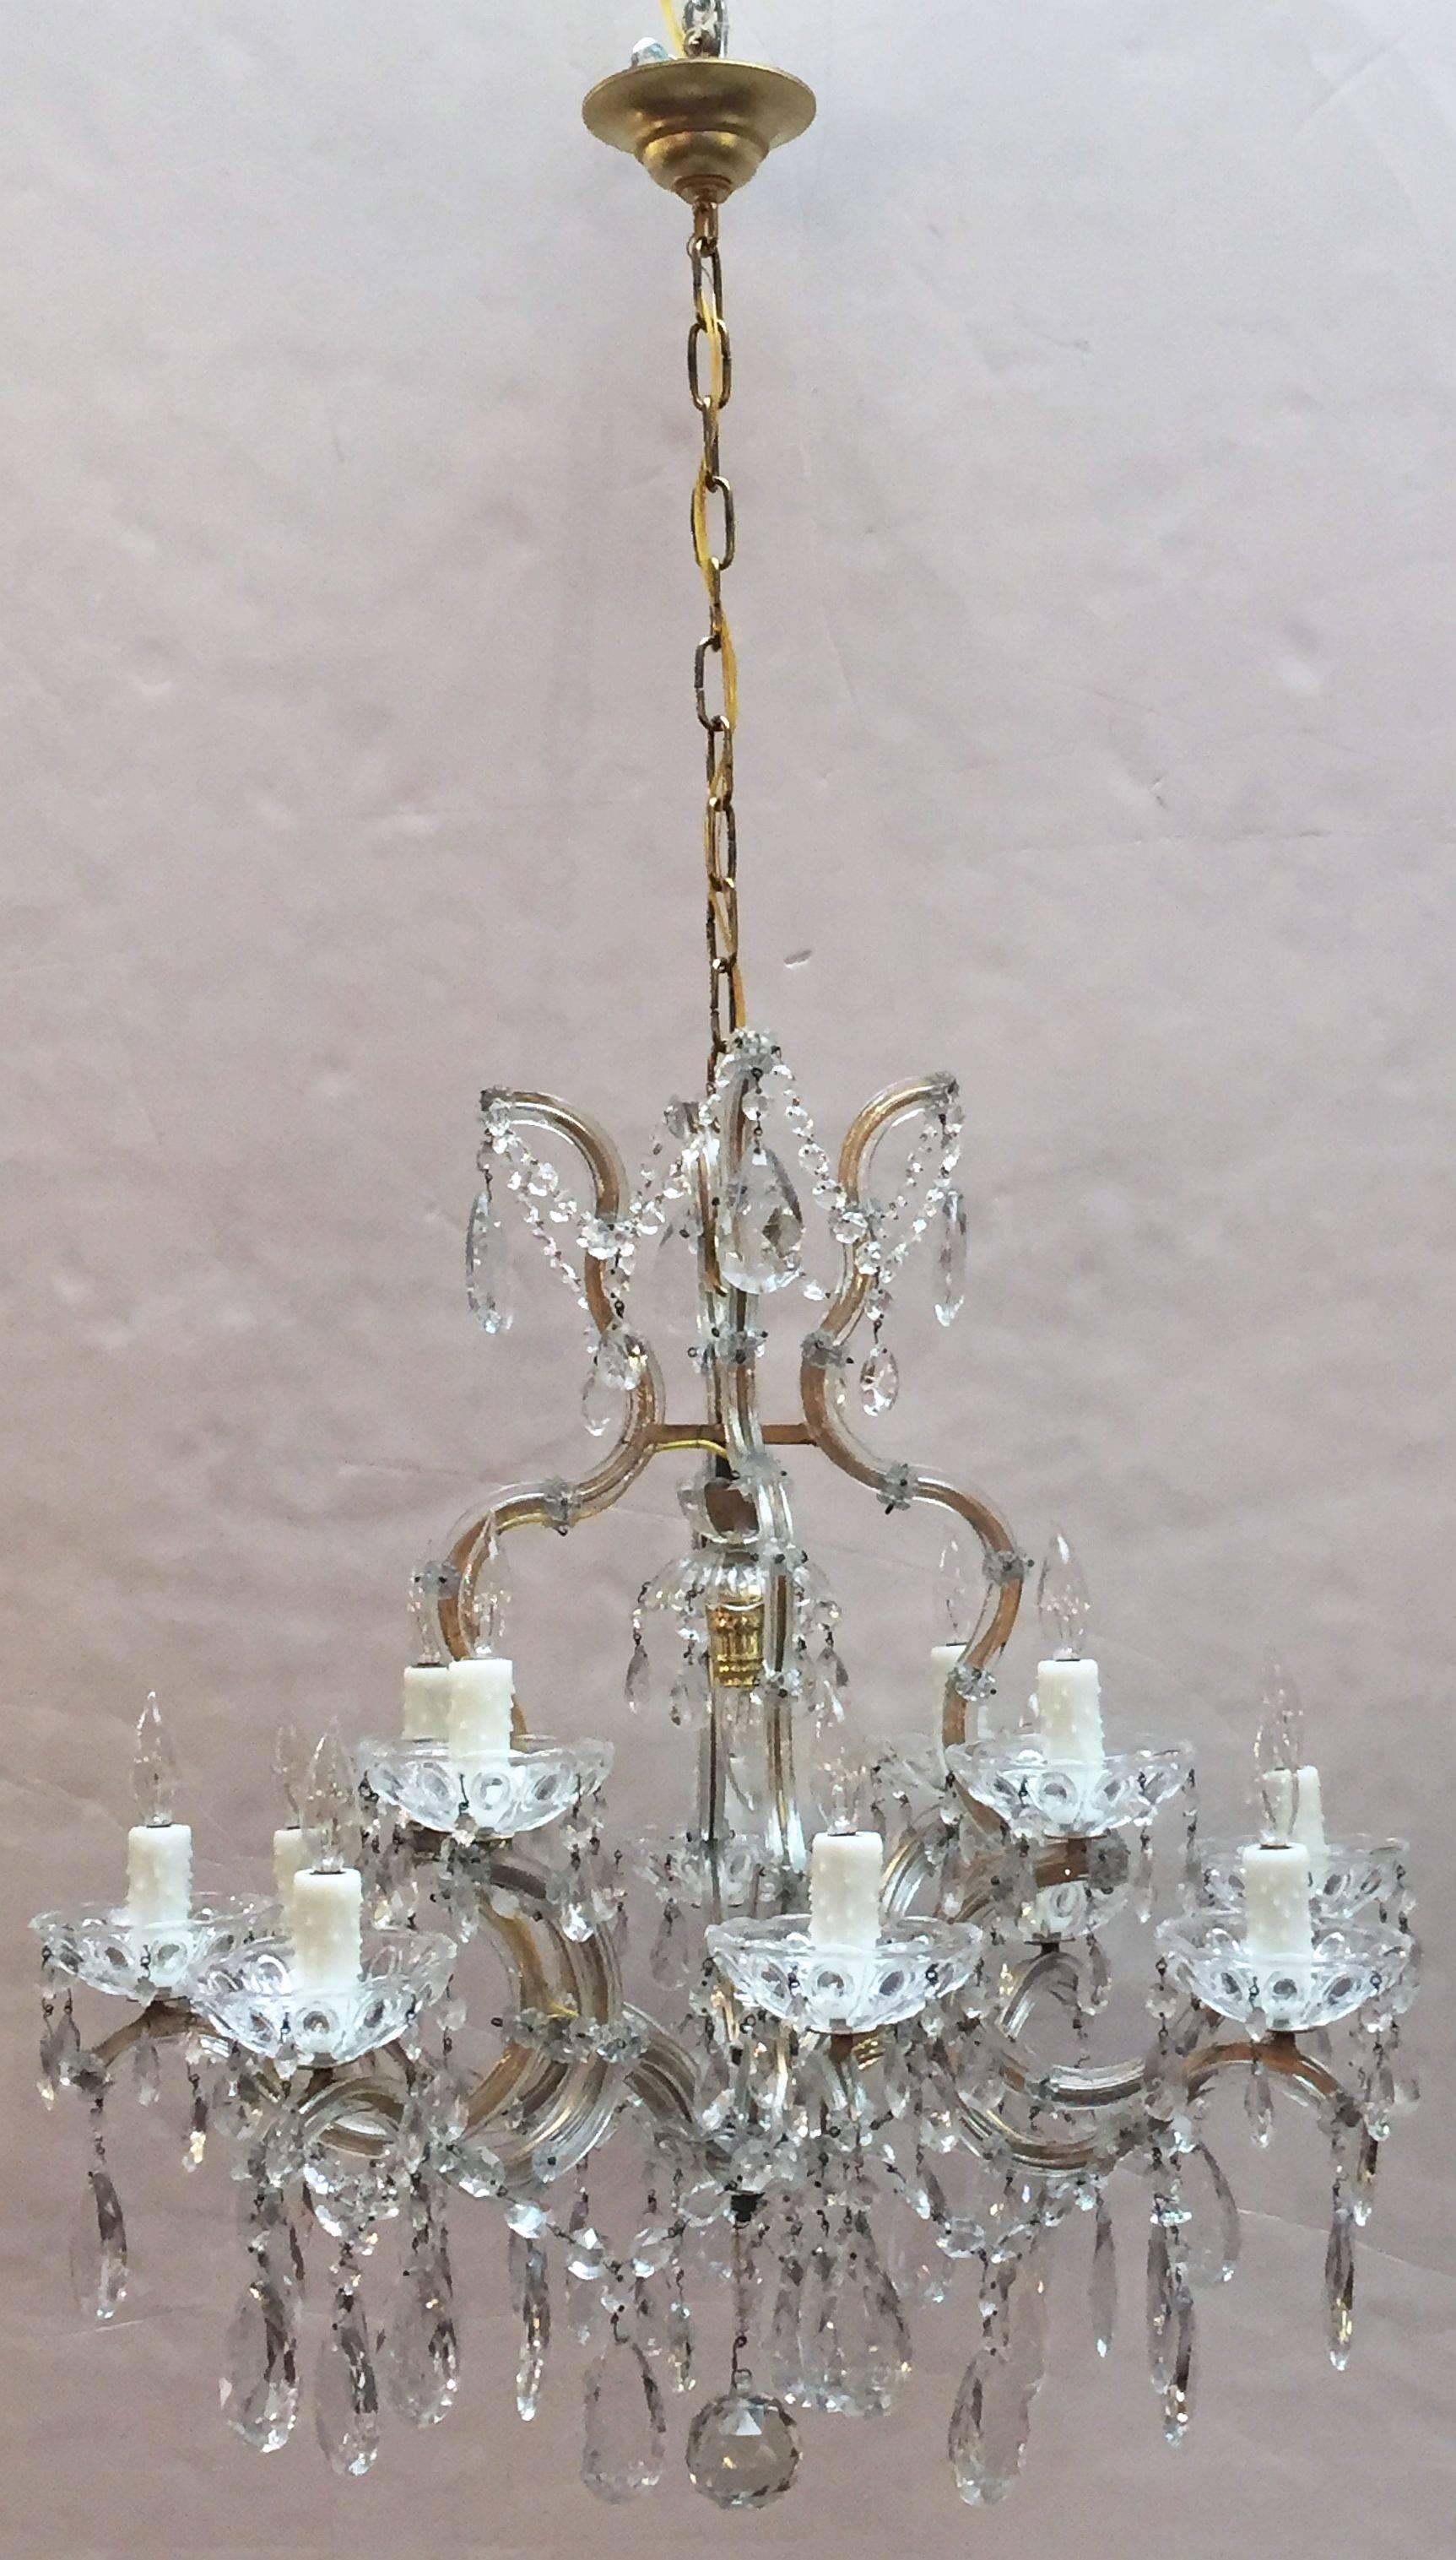 A fine large Maria Theresa seventeen-light chandelier (or hanging fixture) of crystal, glass and gilt metal featuring serpentine arms, each candle light with dangling pendants and decorative bobeche.

Measures: 29 inches diameter

U.S.-wired and